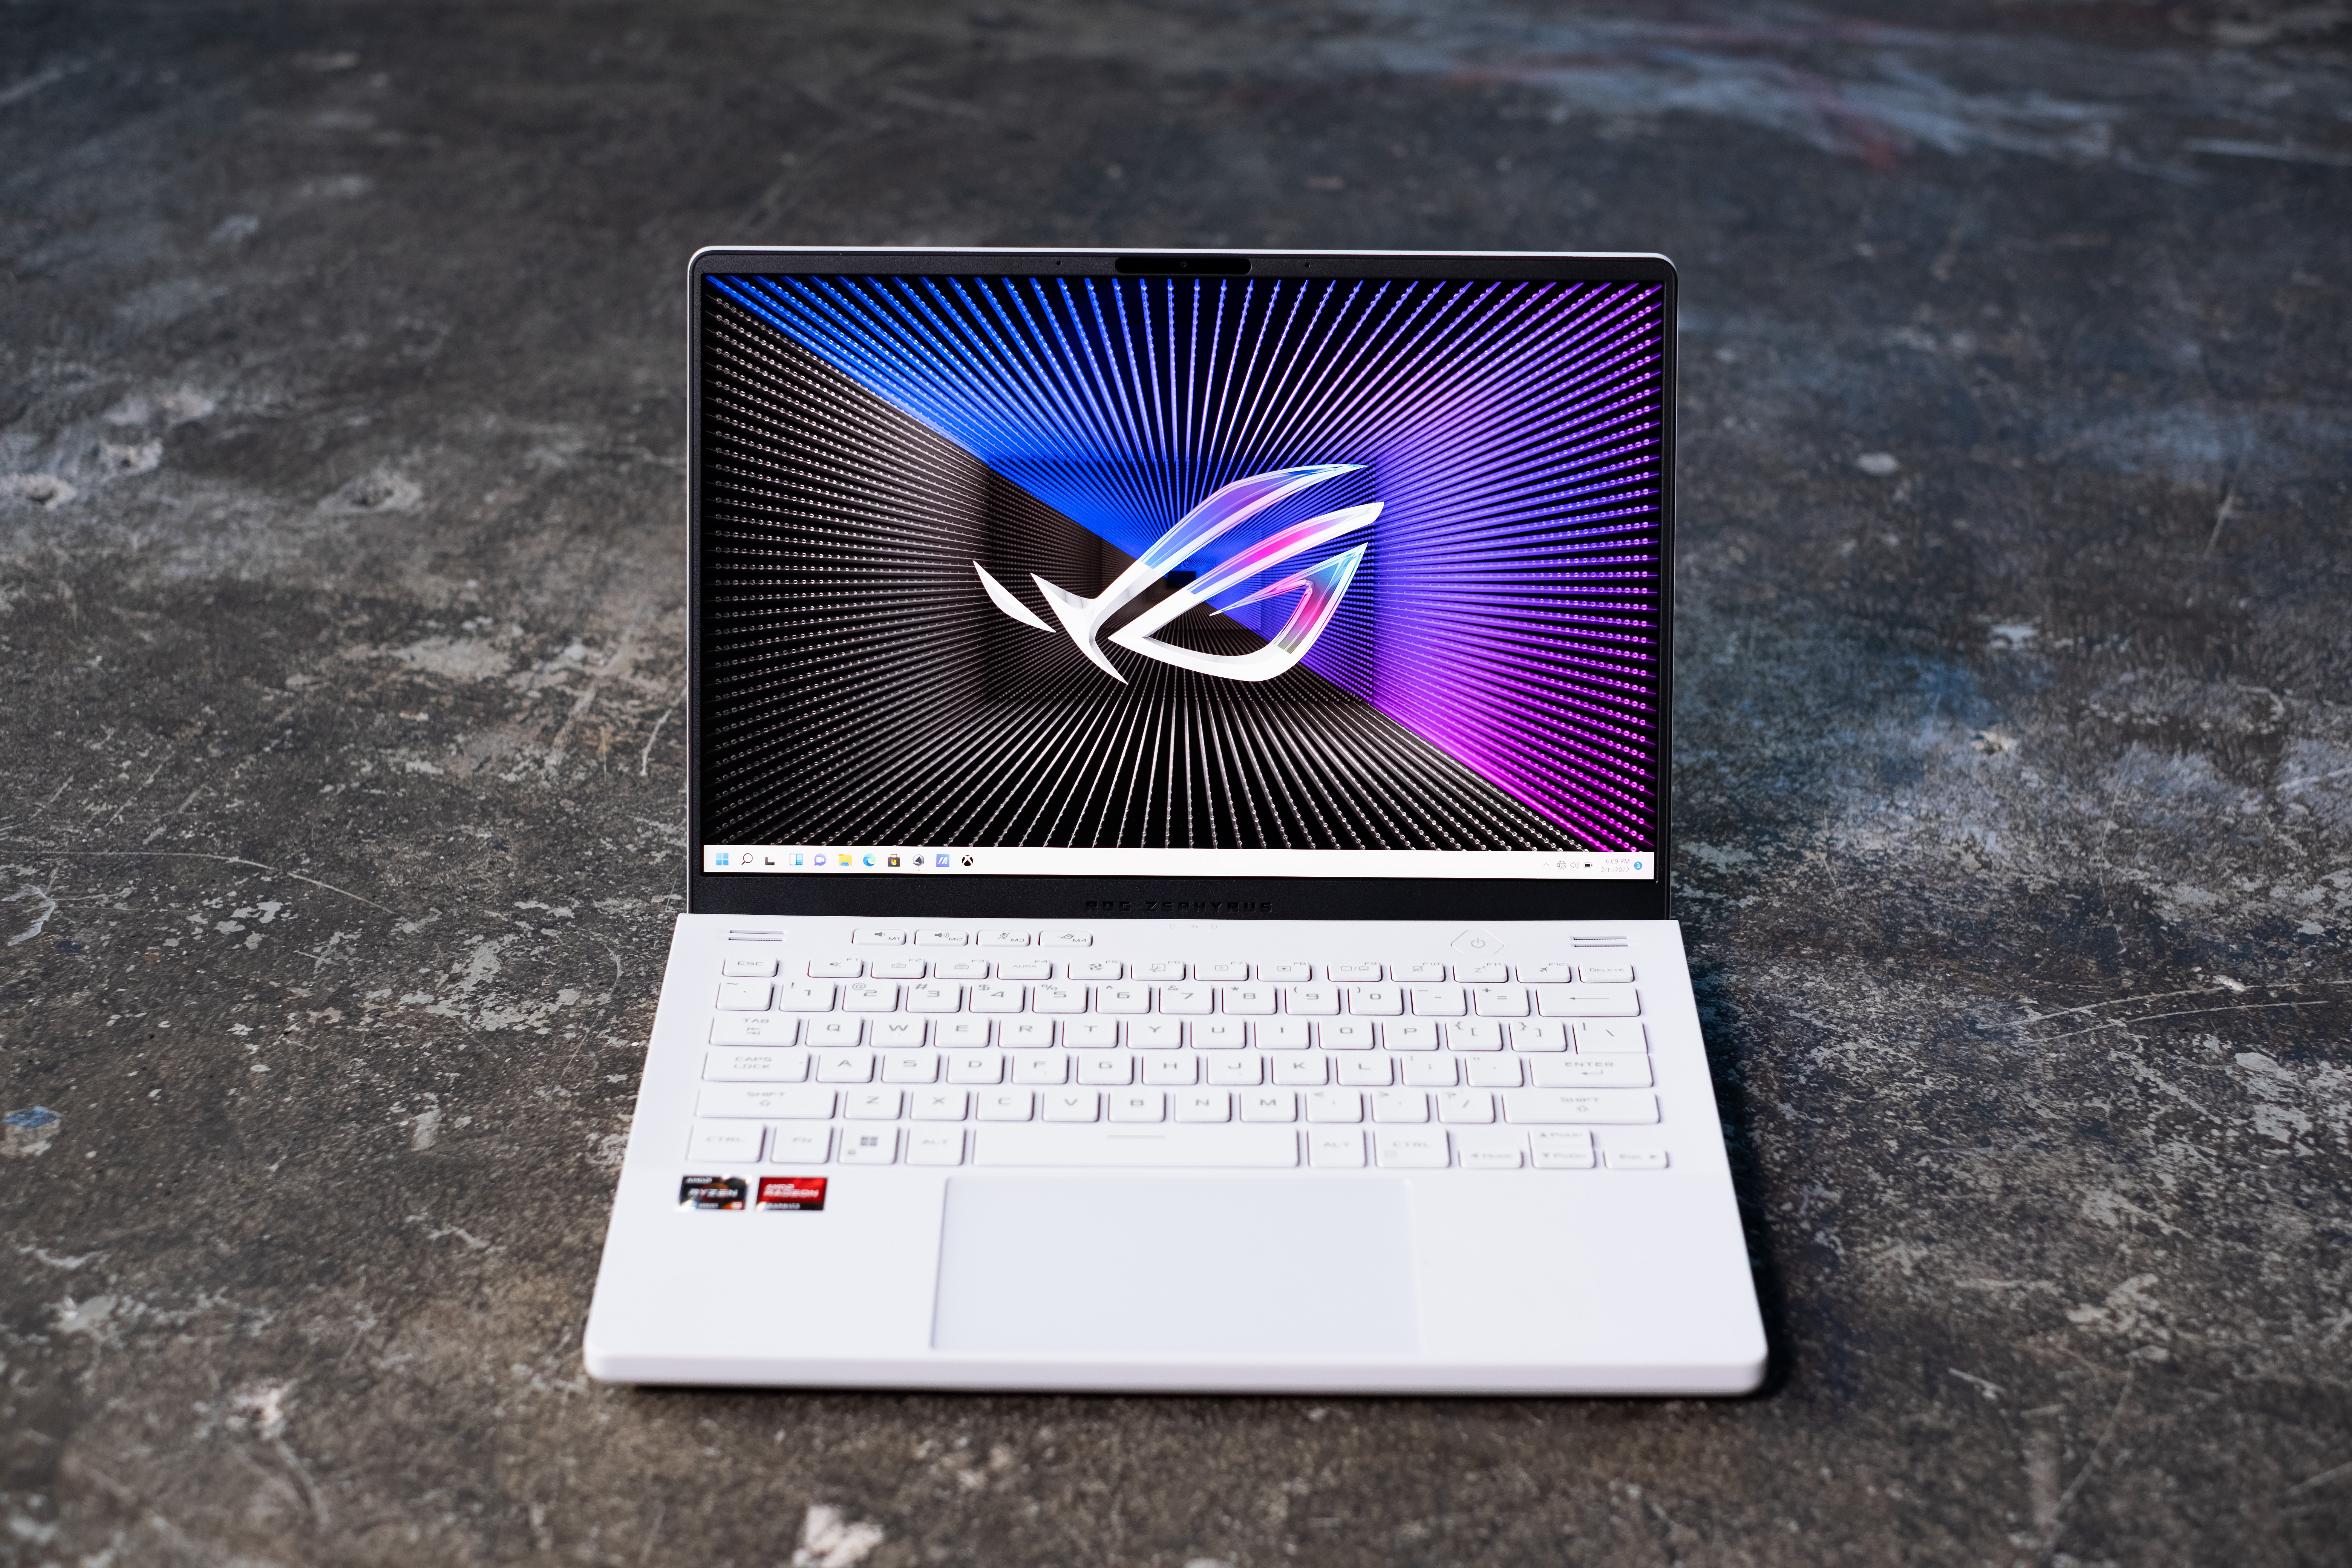 Asus ROG Zephyrus G14 is the most portable